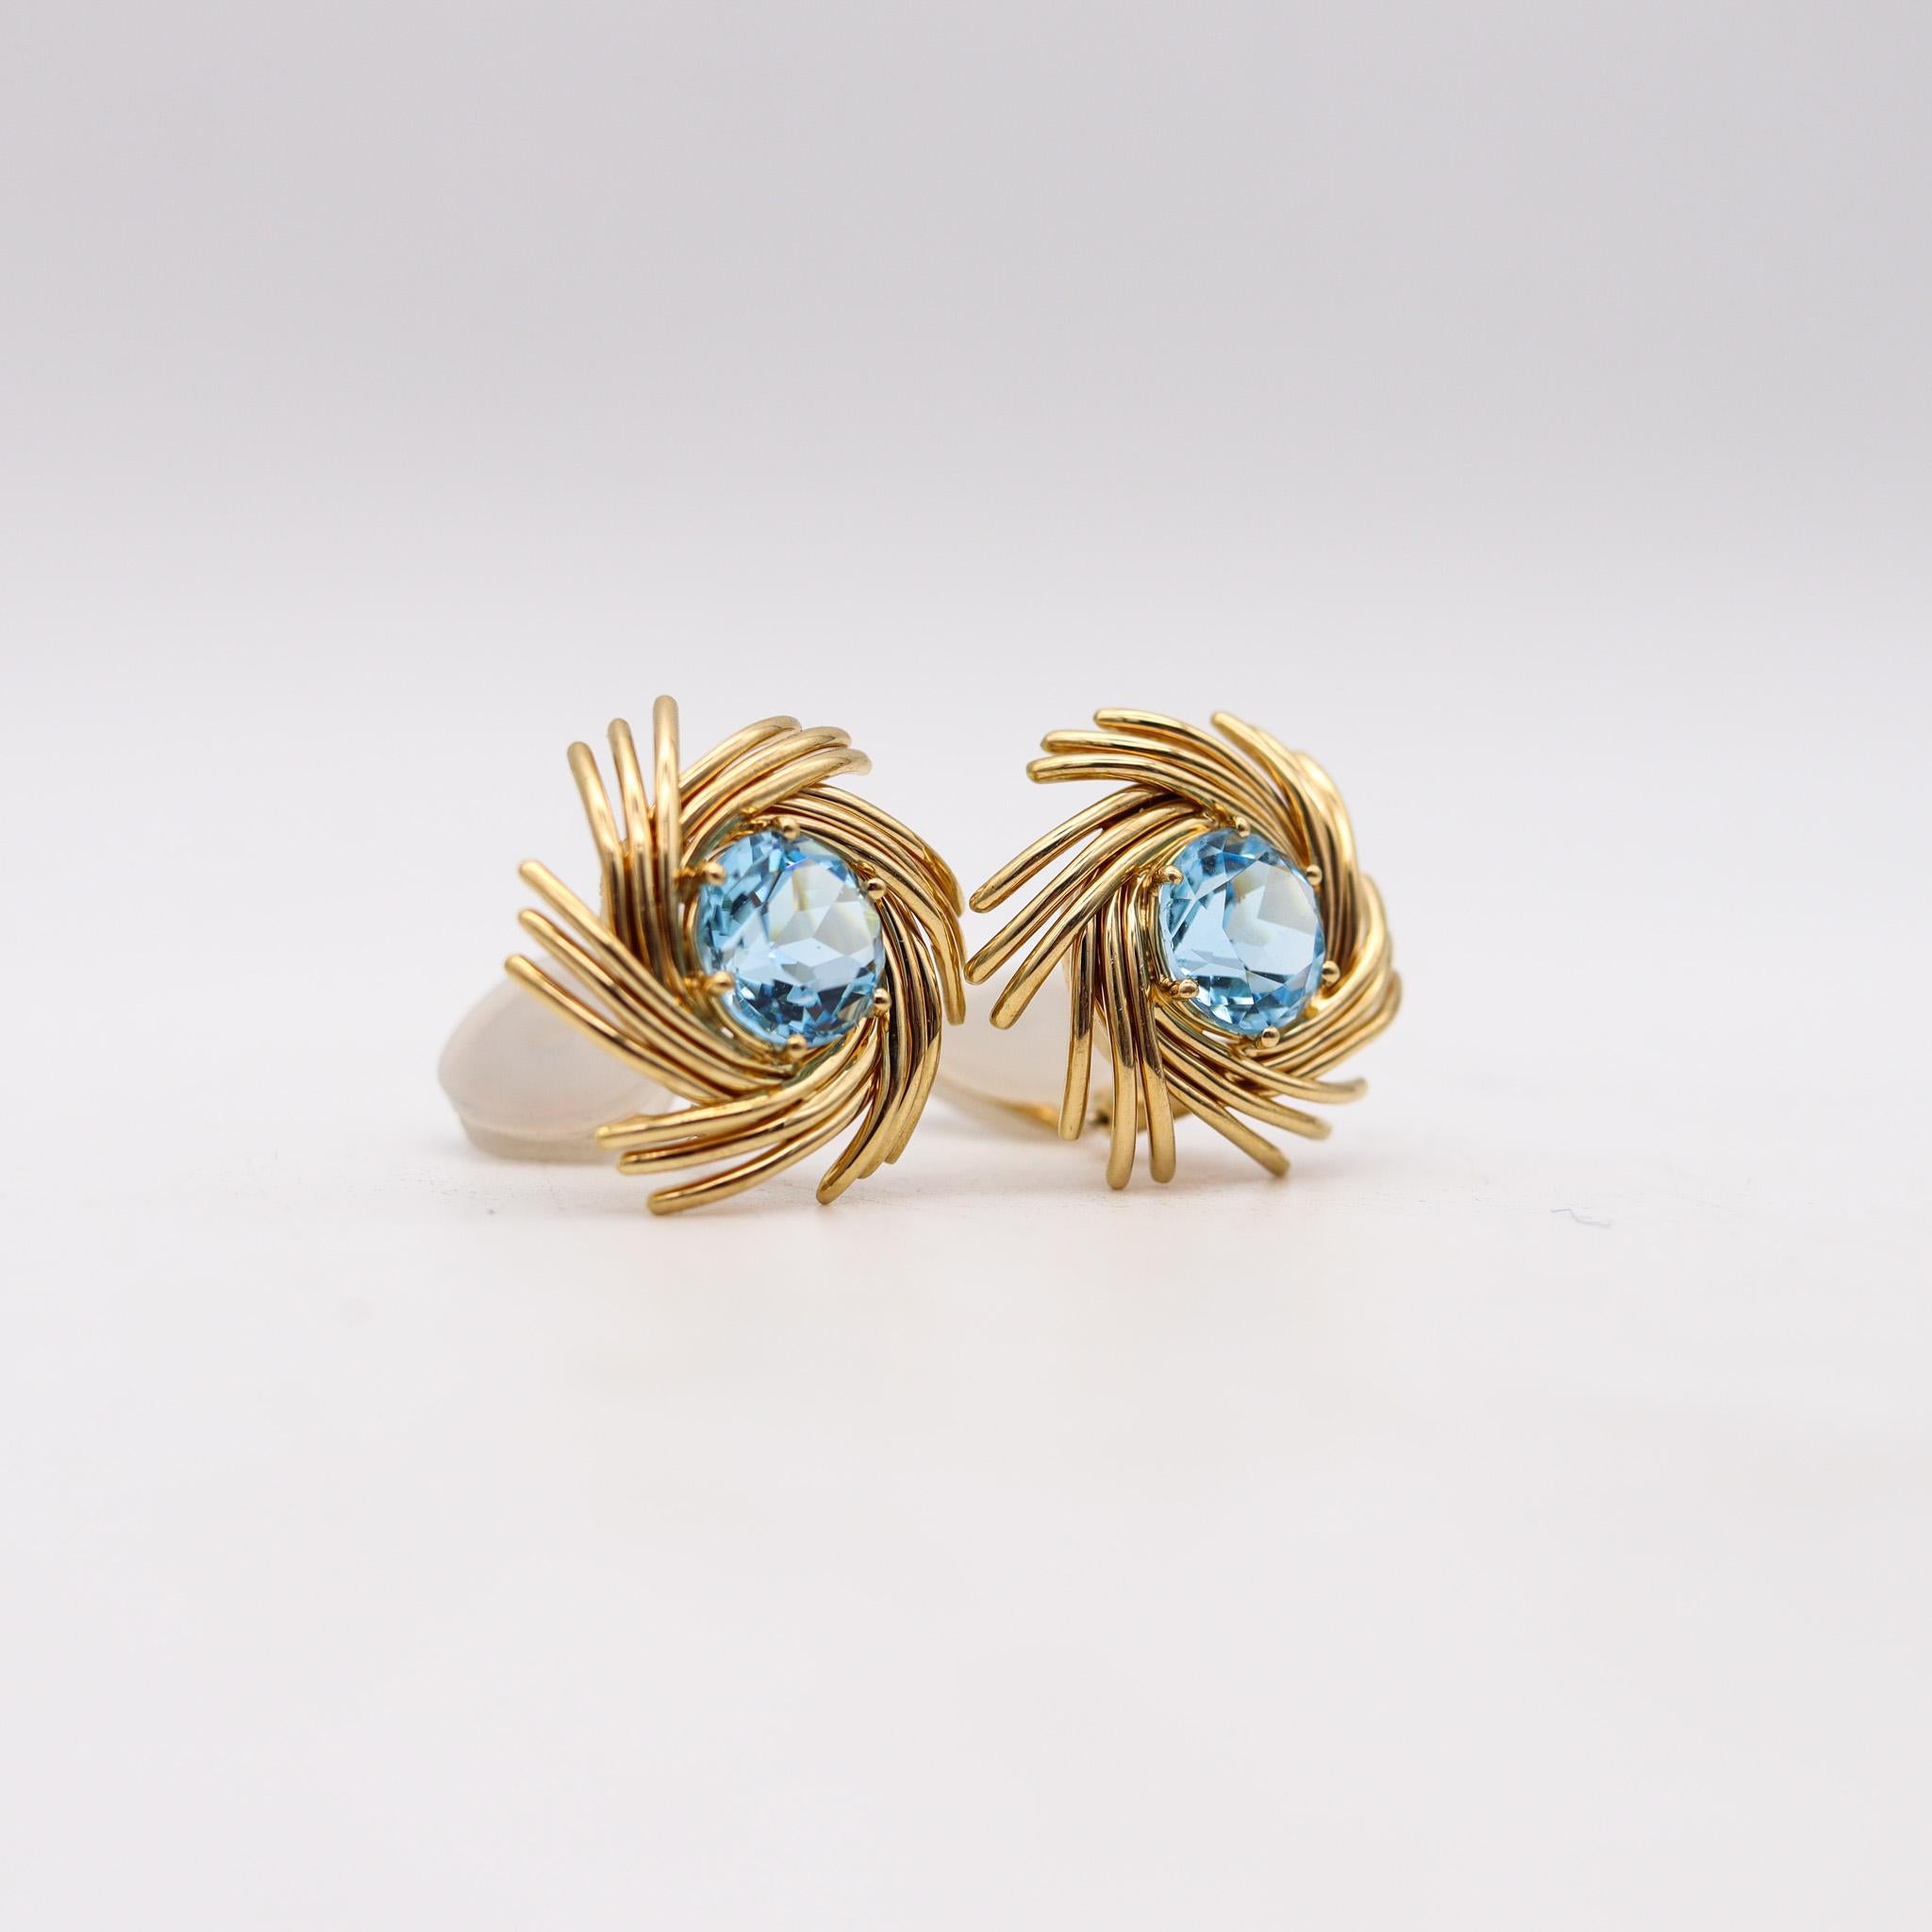 Spike round clip on earrings designed by Jean Schlumberger for Tiffany & Co.

Rare pair of earrings, created in New York city by Jean Schlumberger at the Tiffany Studios, back in the 1970's. They was crafted with spike shapes in solid yellow gold of